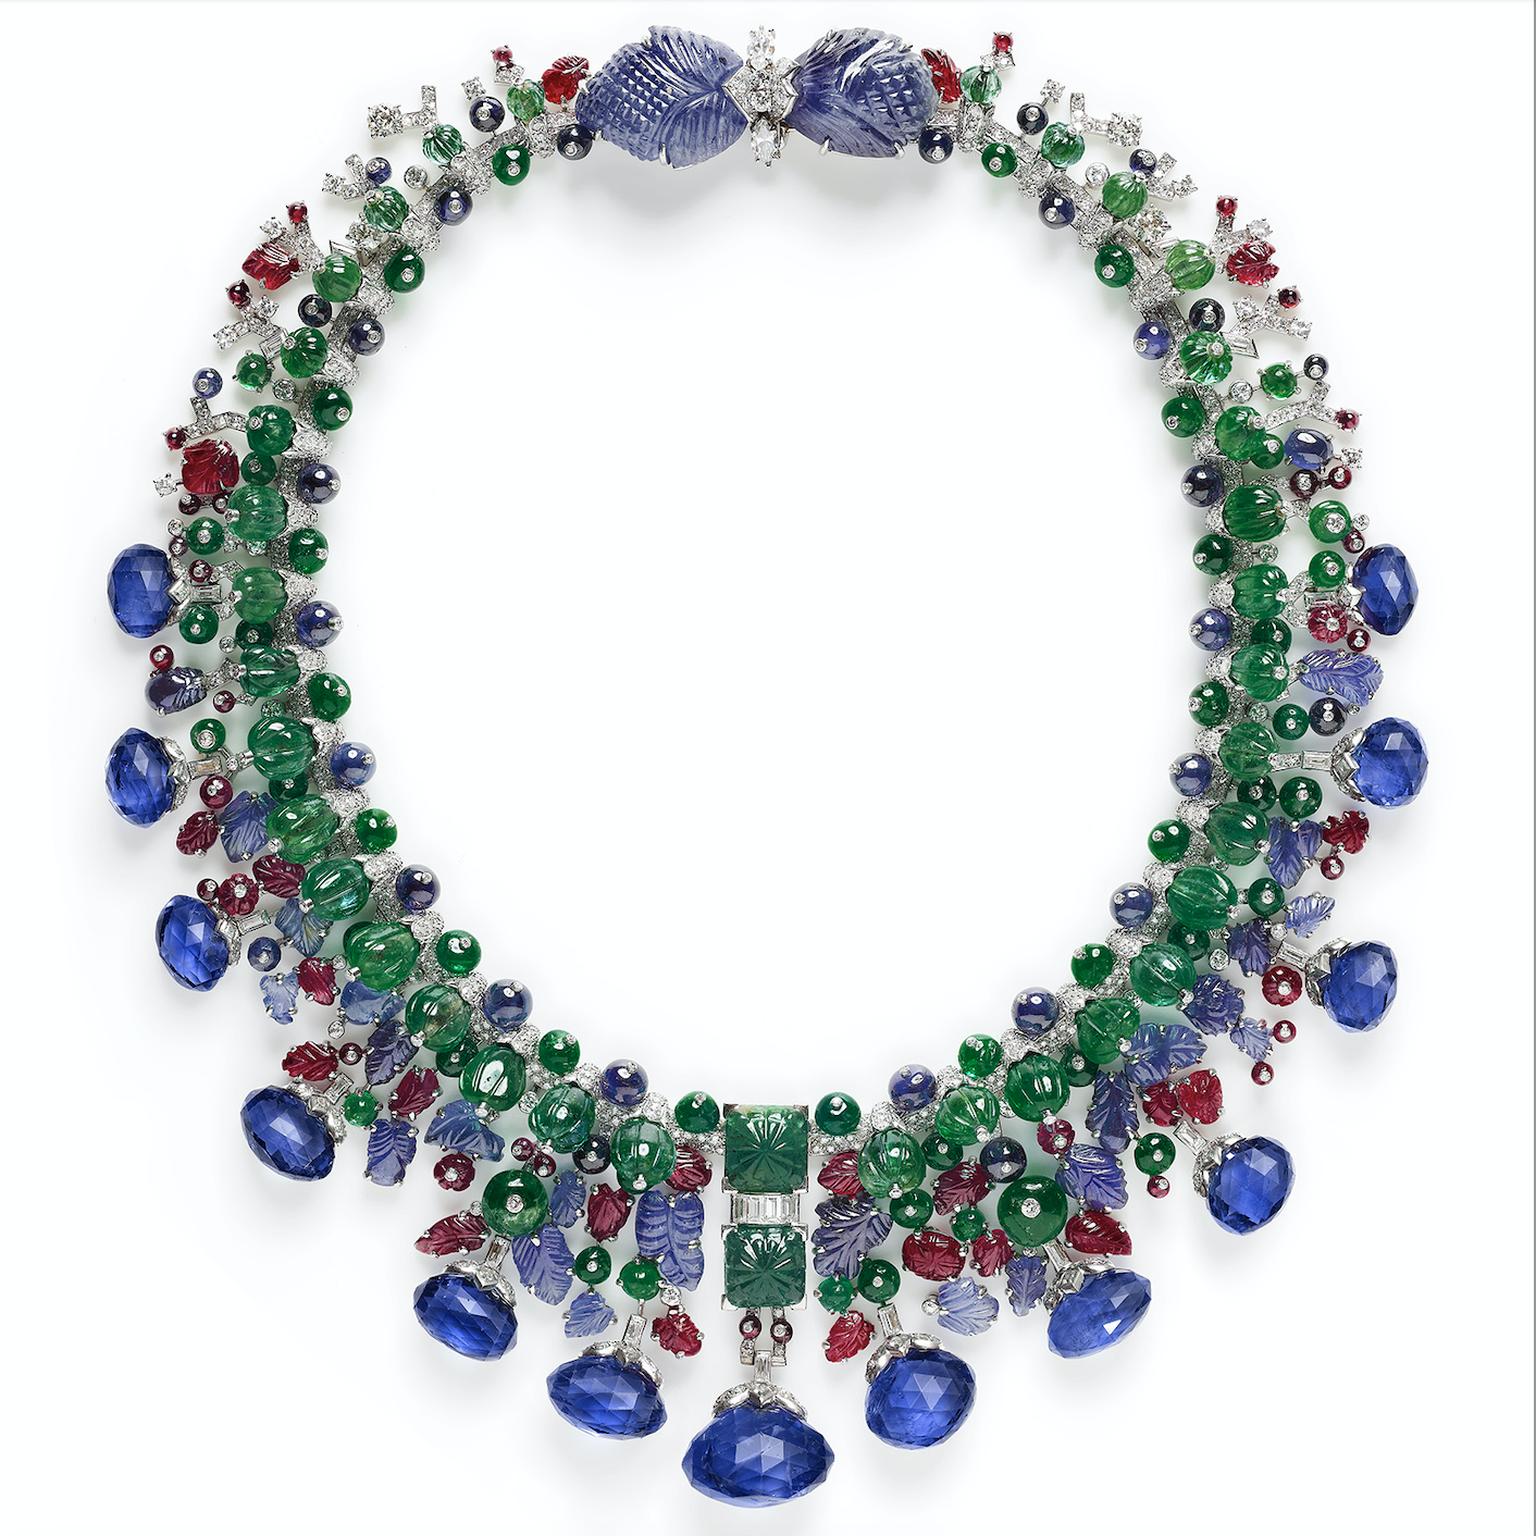 Cartier Hindu Necklace 1936 -altered 1963 - carved emeralds-rubies-sapphires-diamonds floral motifs